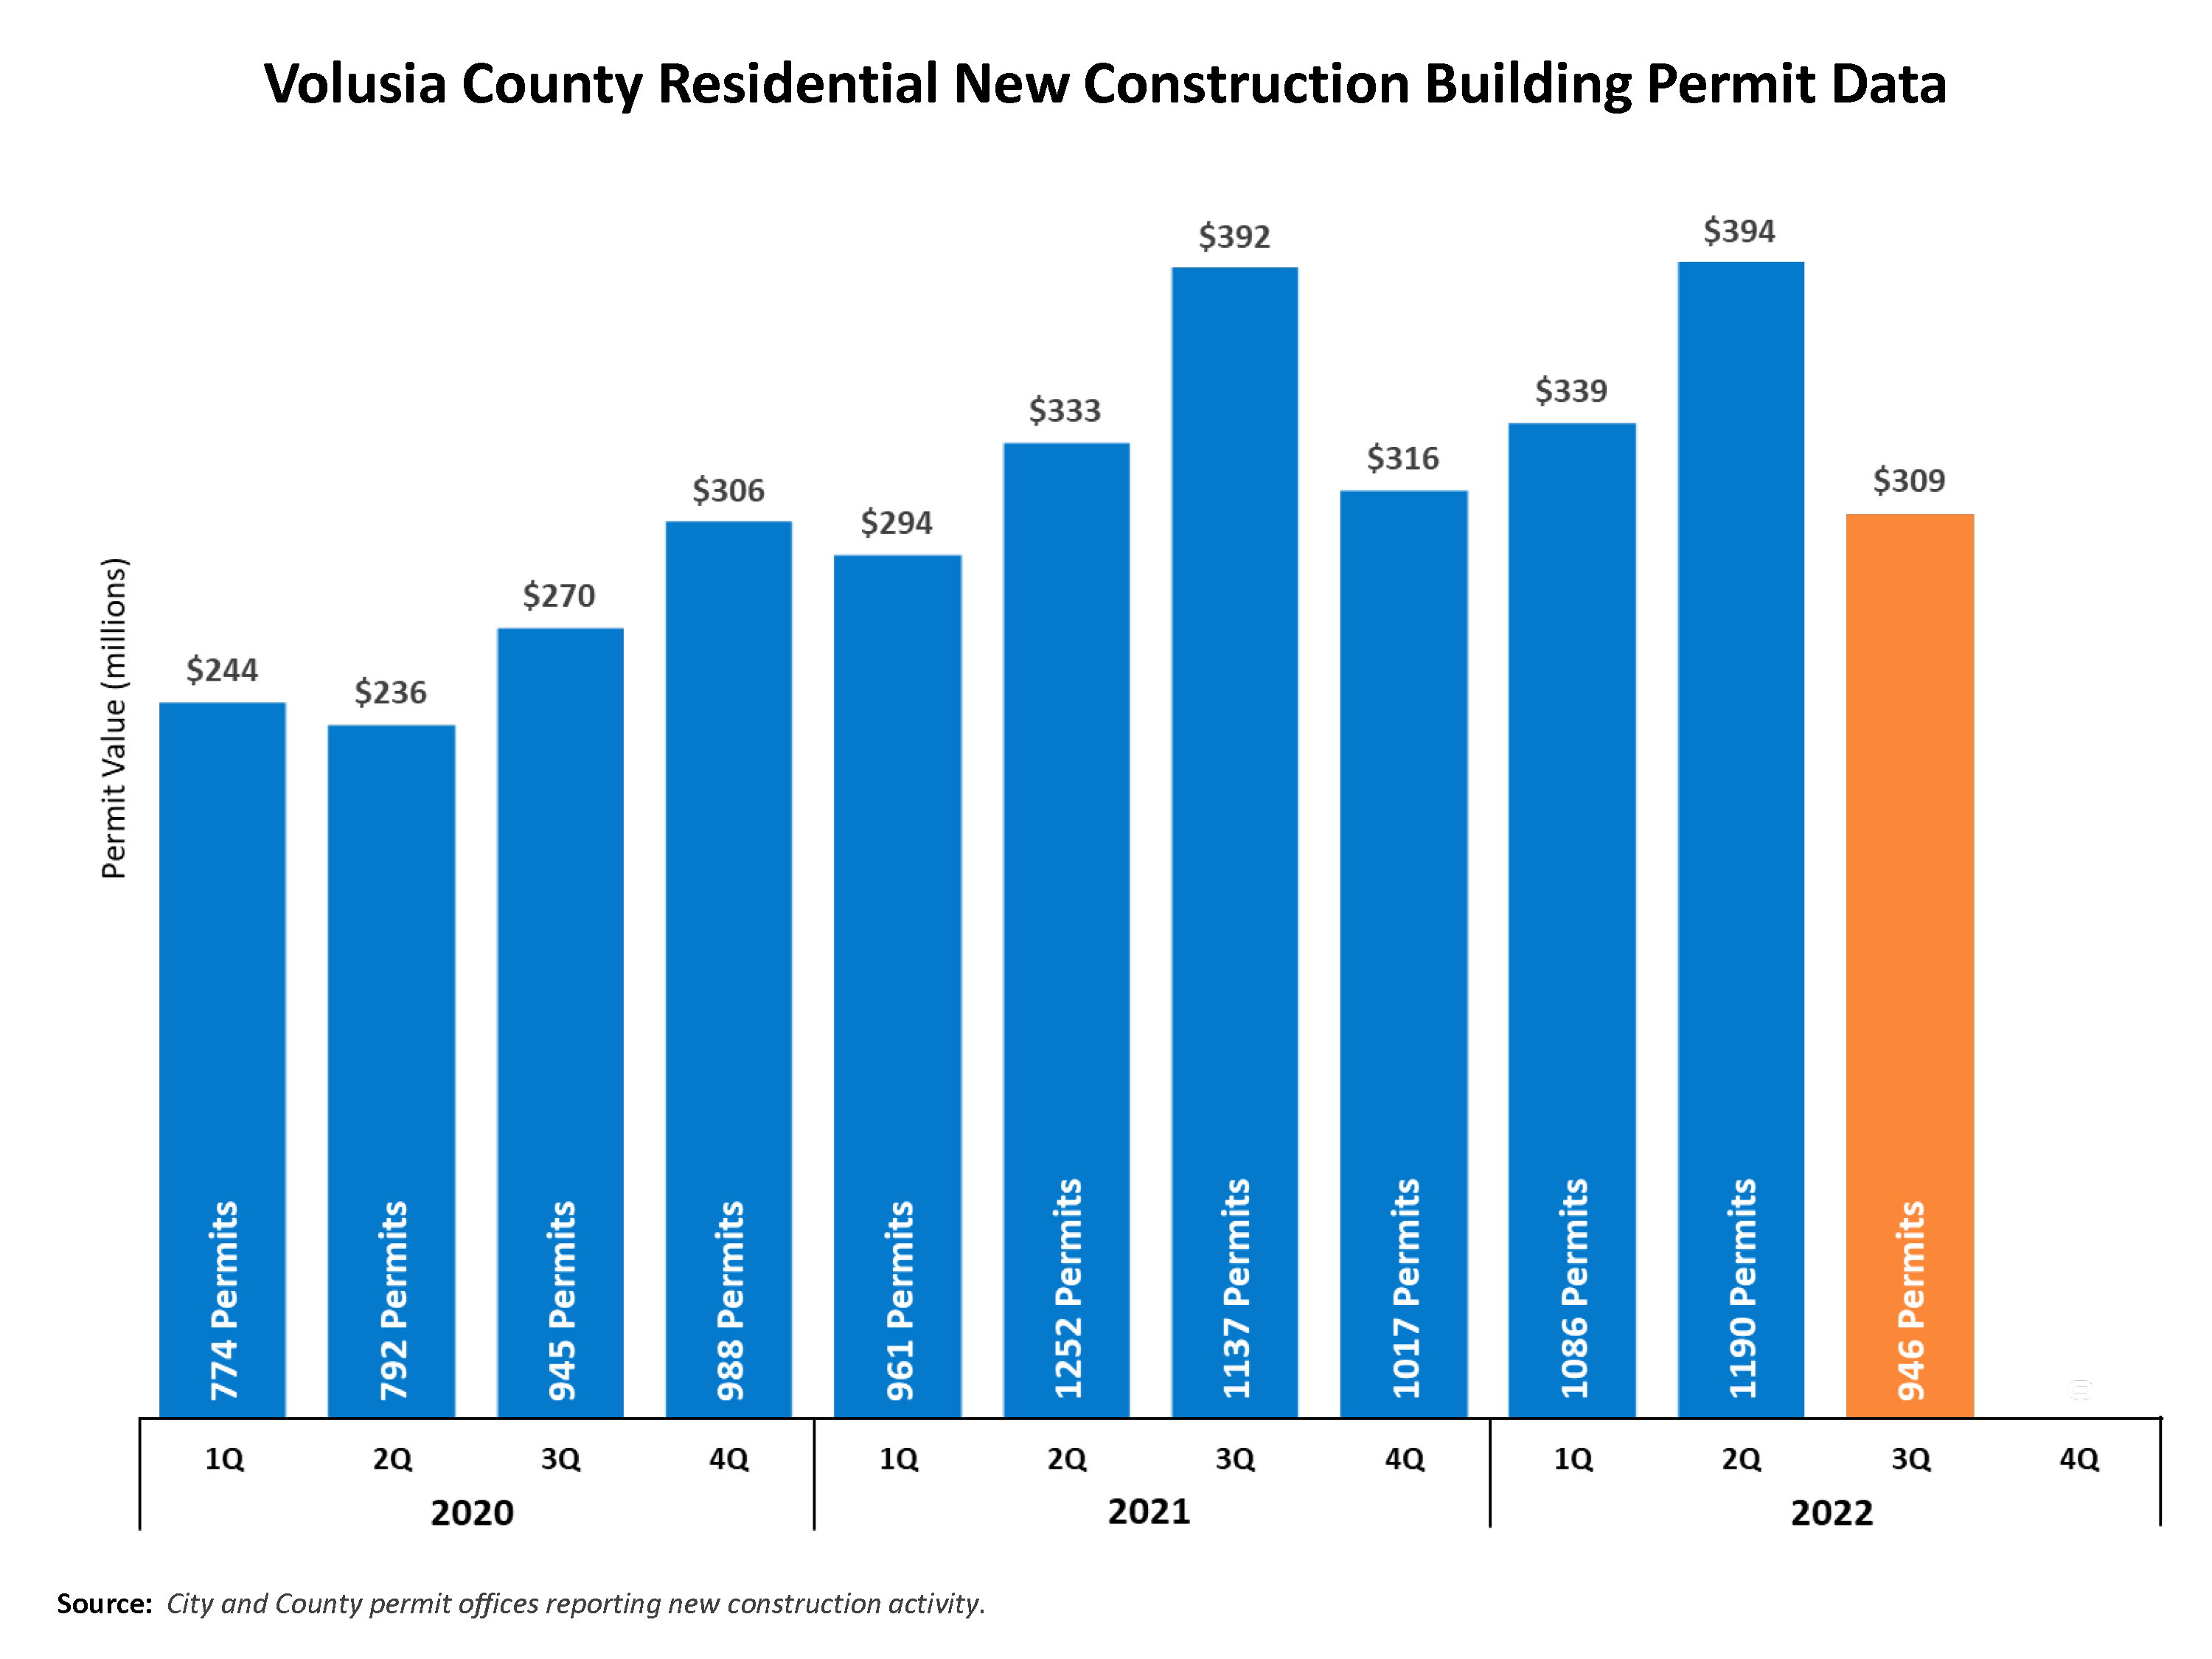 Chart showing the 10 most recent quarters of residential building permit activity ending Sept. 2022